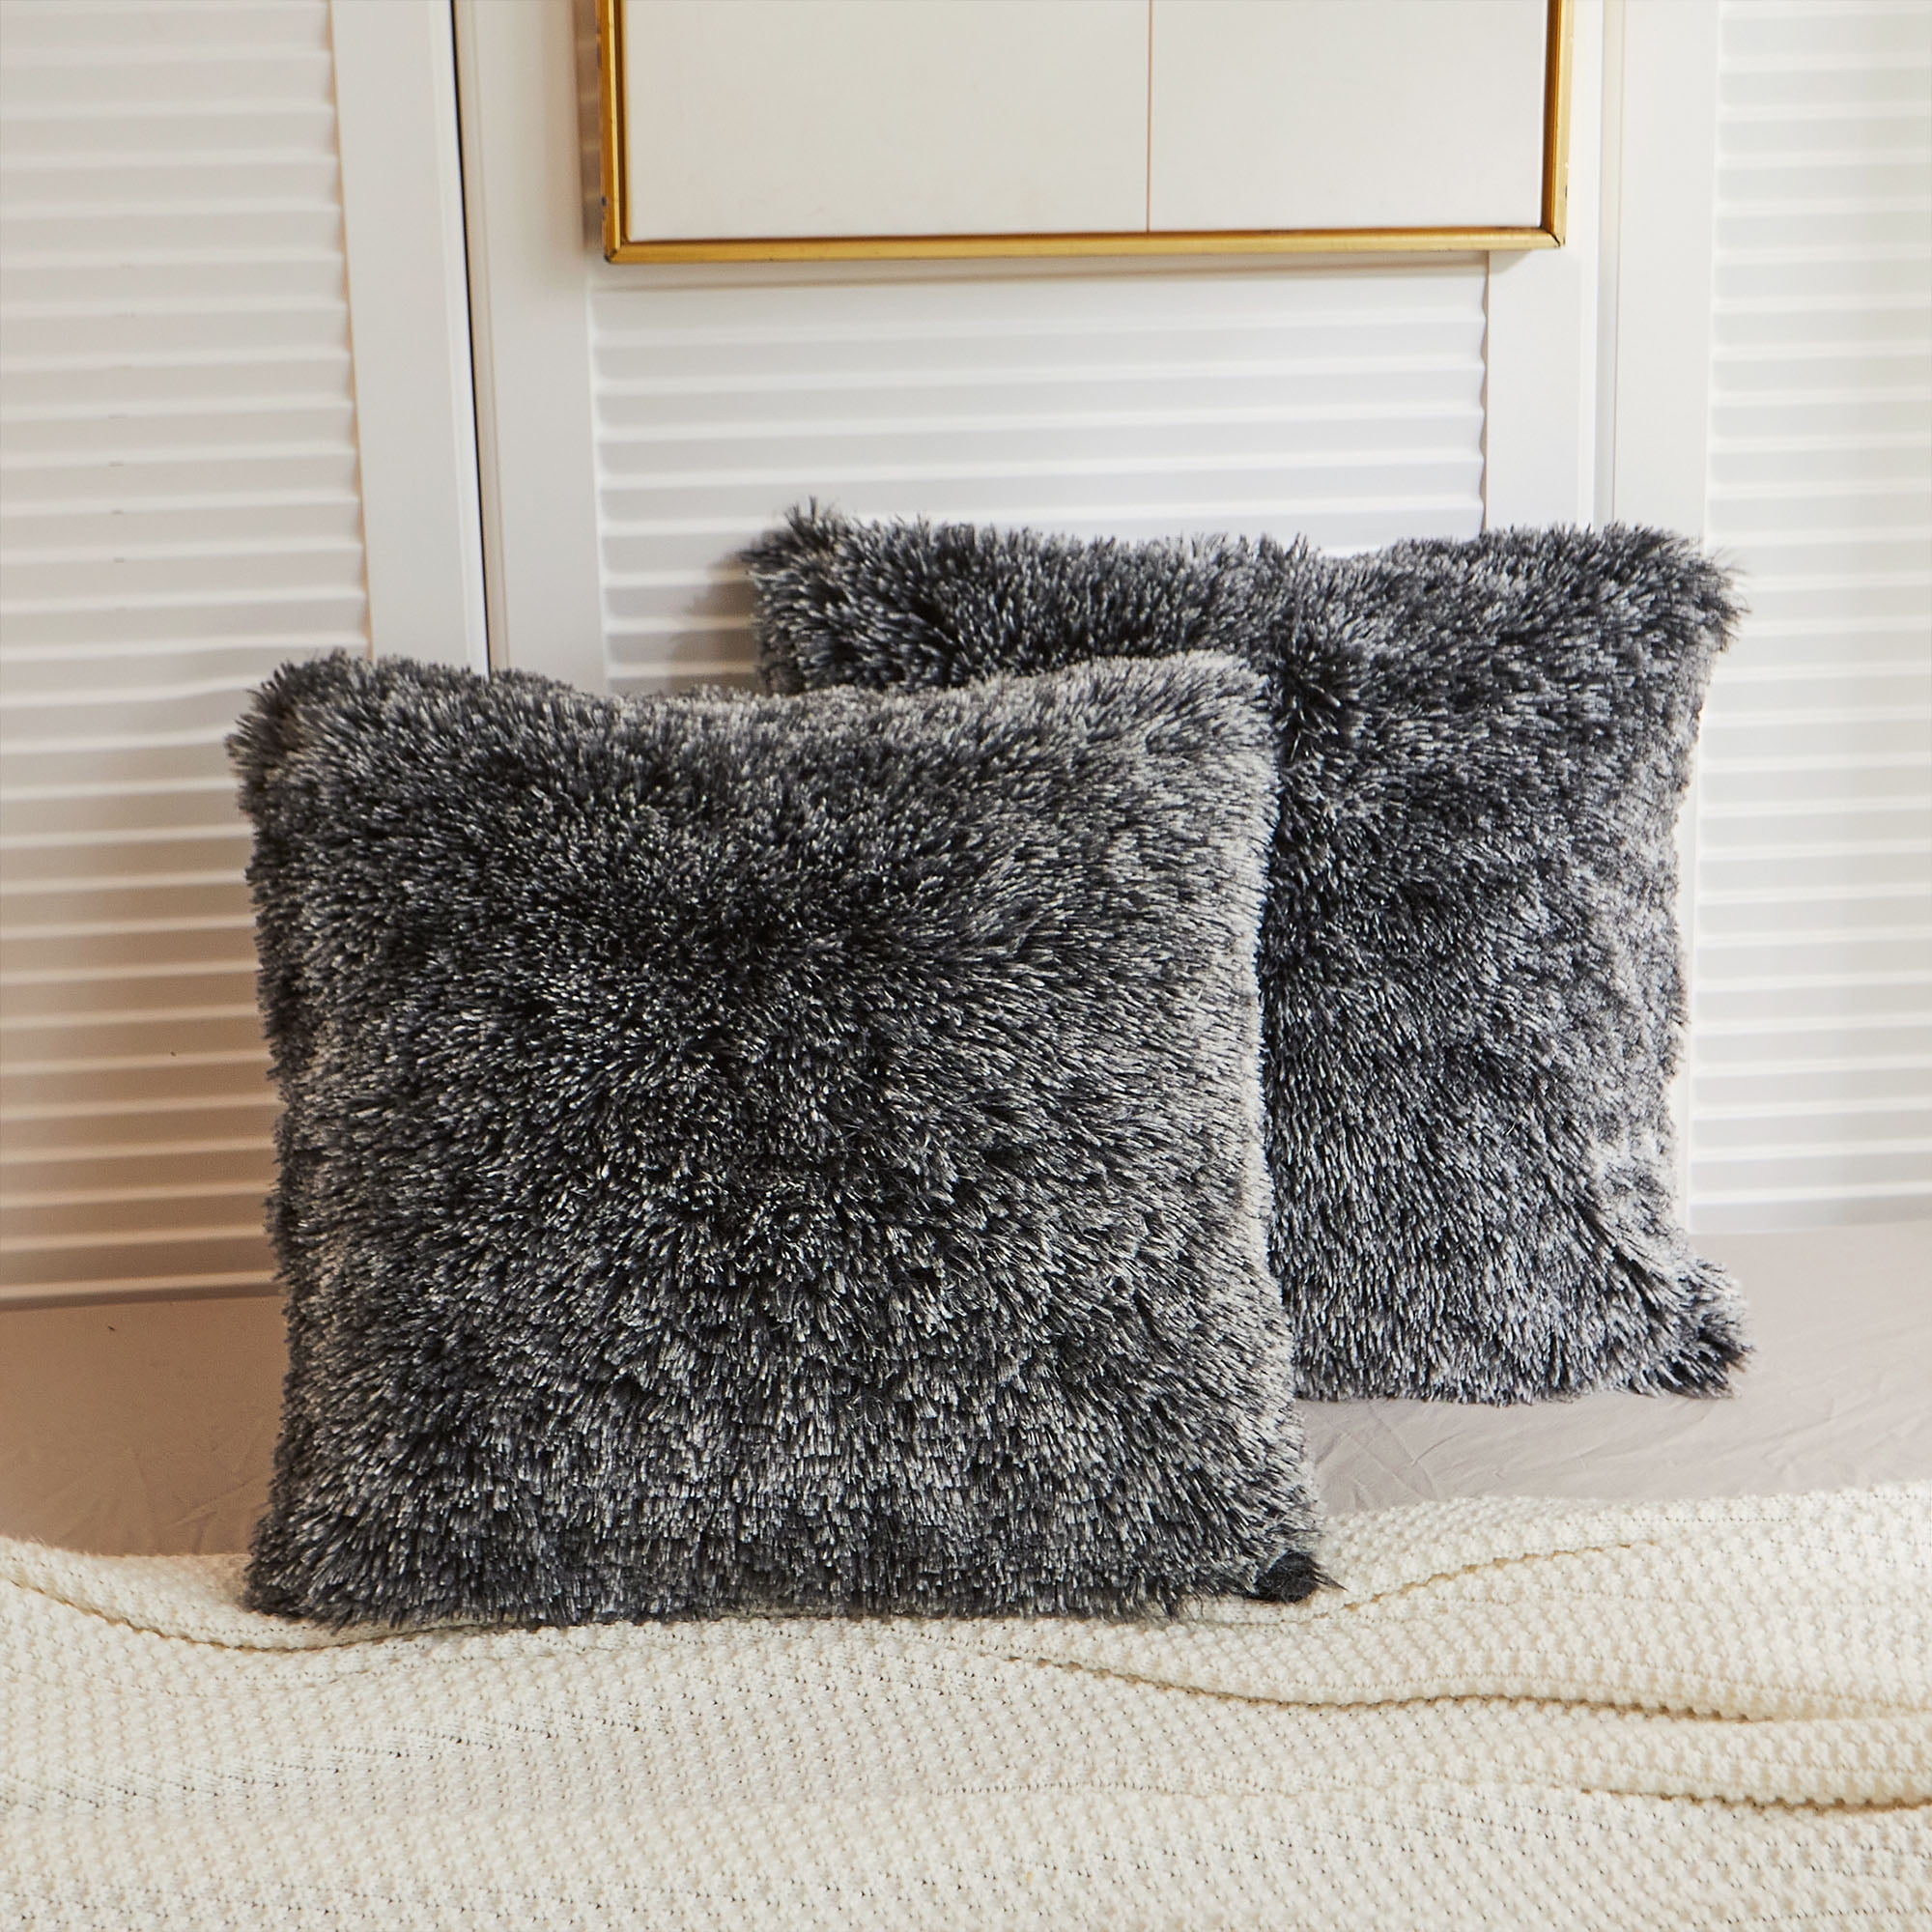 Trinity 2 Pieces Shaggy Fluffy Faux Fur Decorative Throw Pillow Cover, Taupe, 18 x 18 Inches